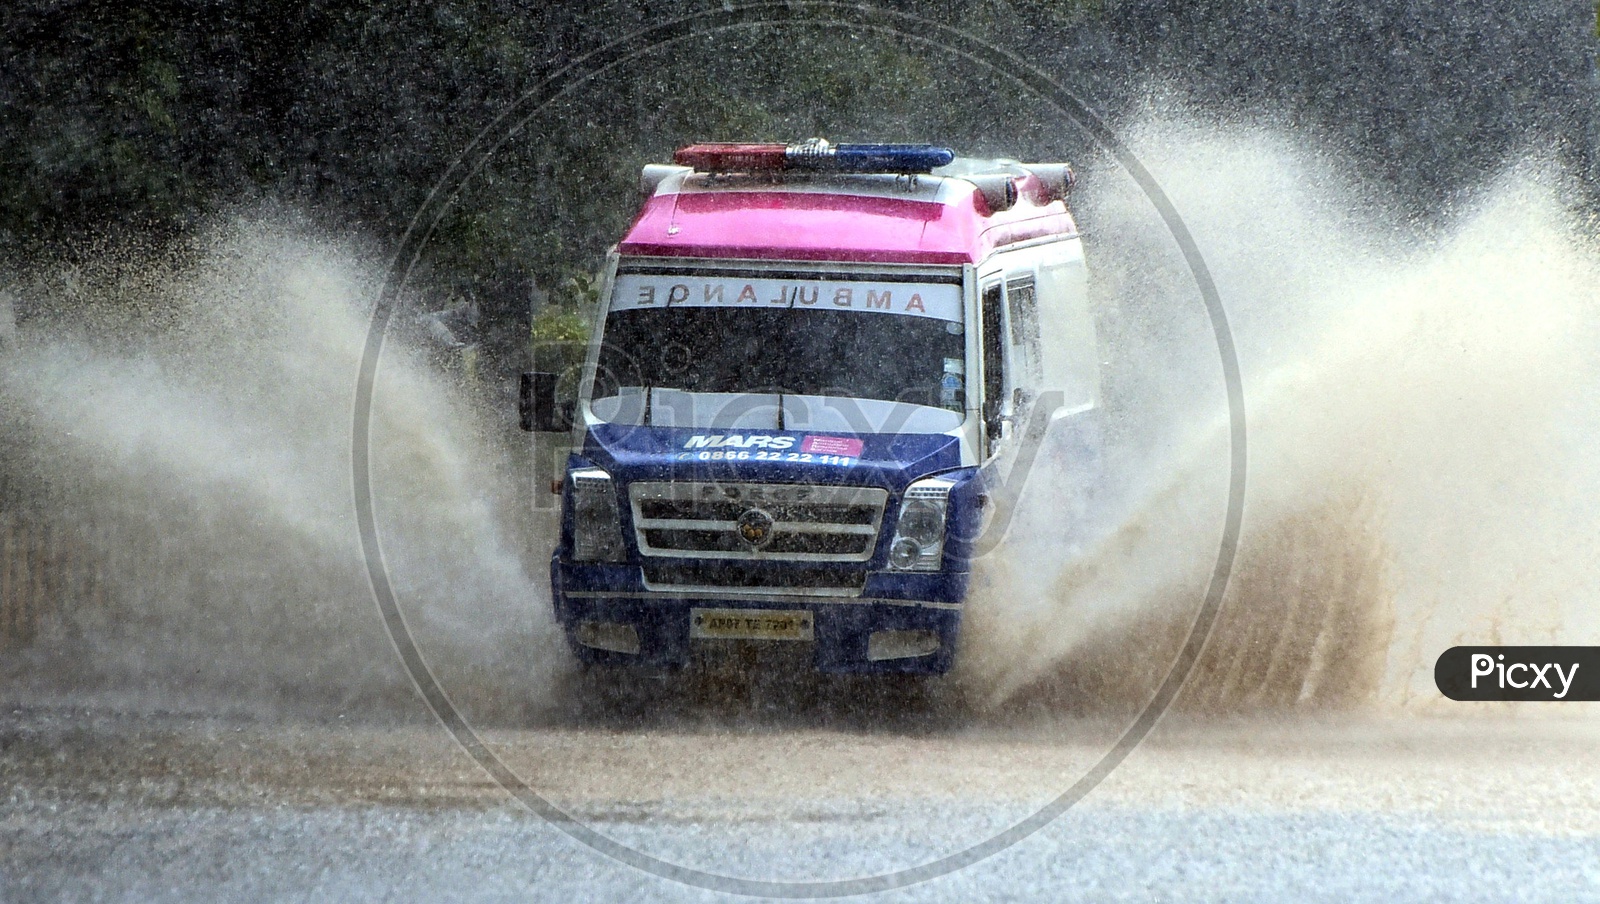 Ambulance on the flooded road